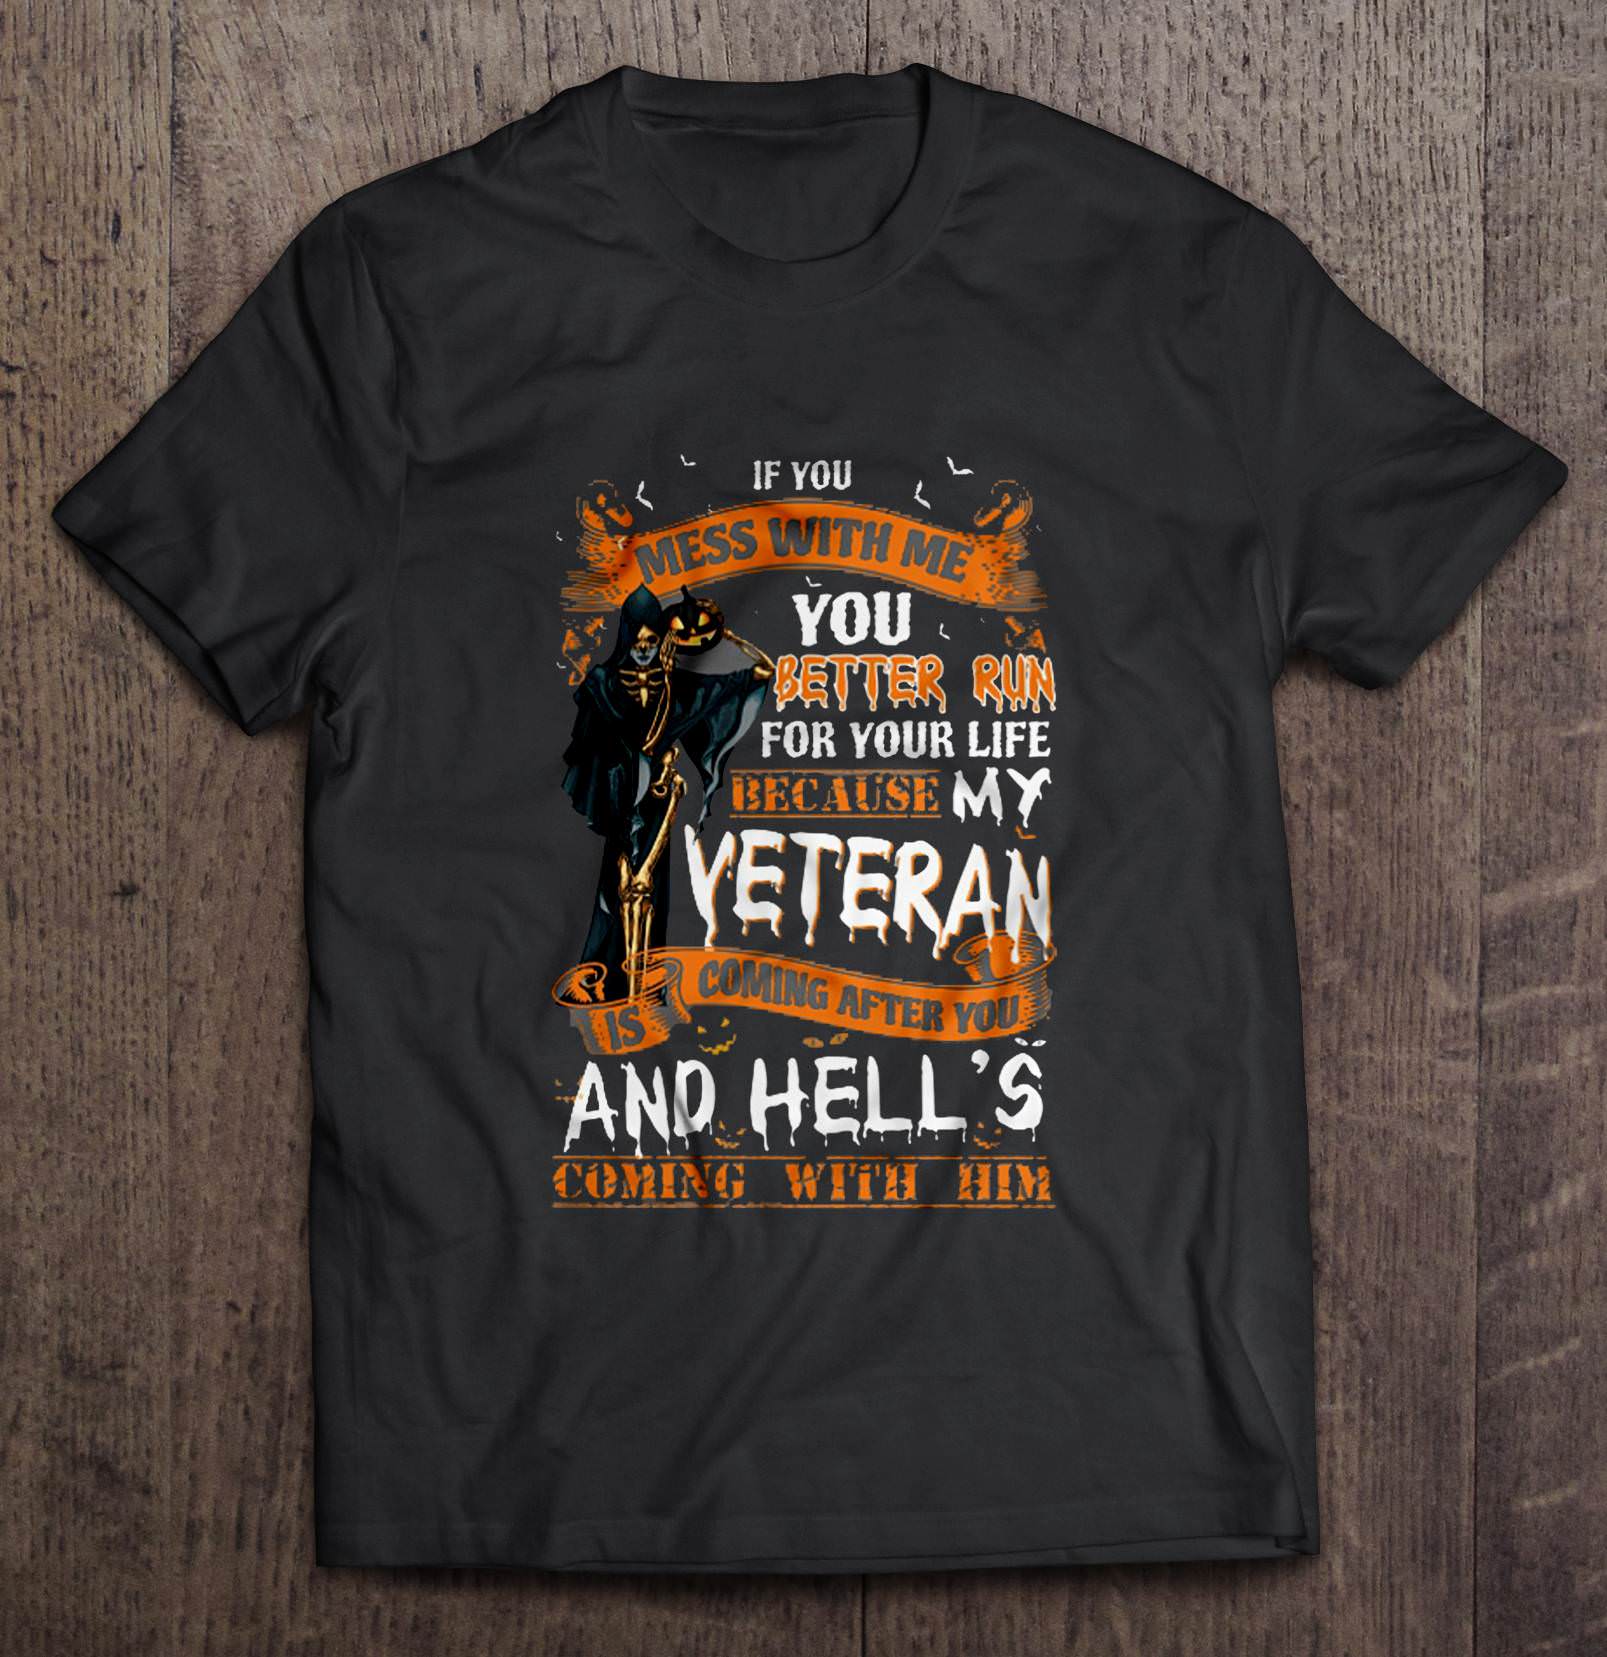 My Veteran Is Coming After You And Hell’s Coming With Him Halloween Shirt